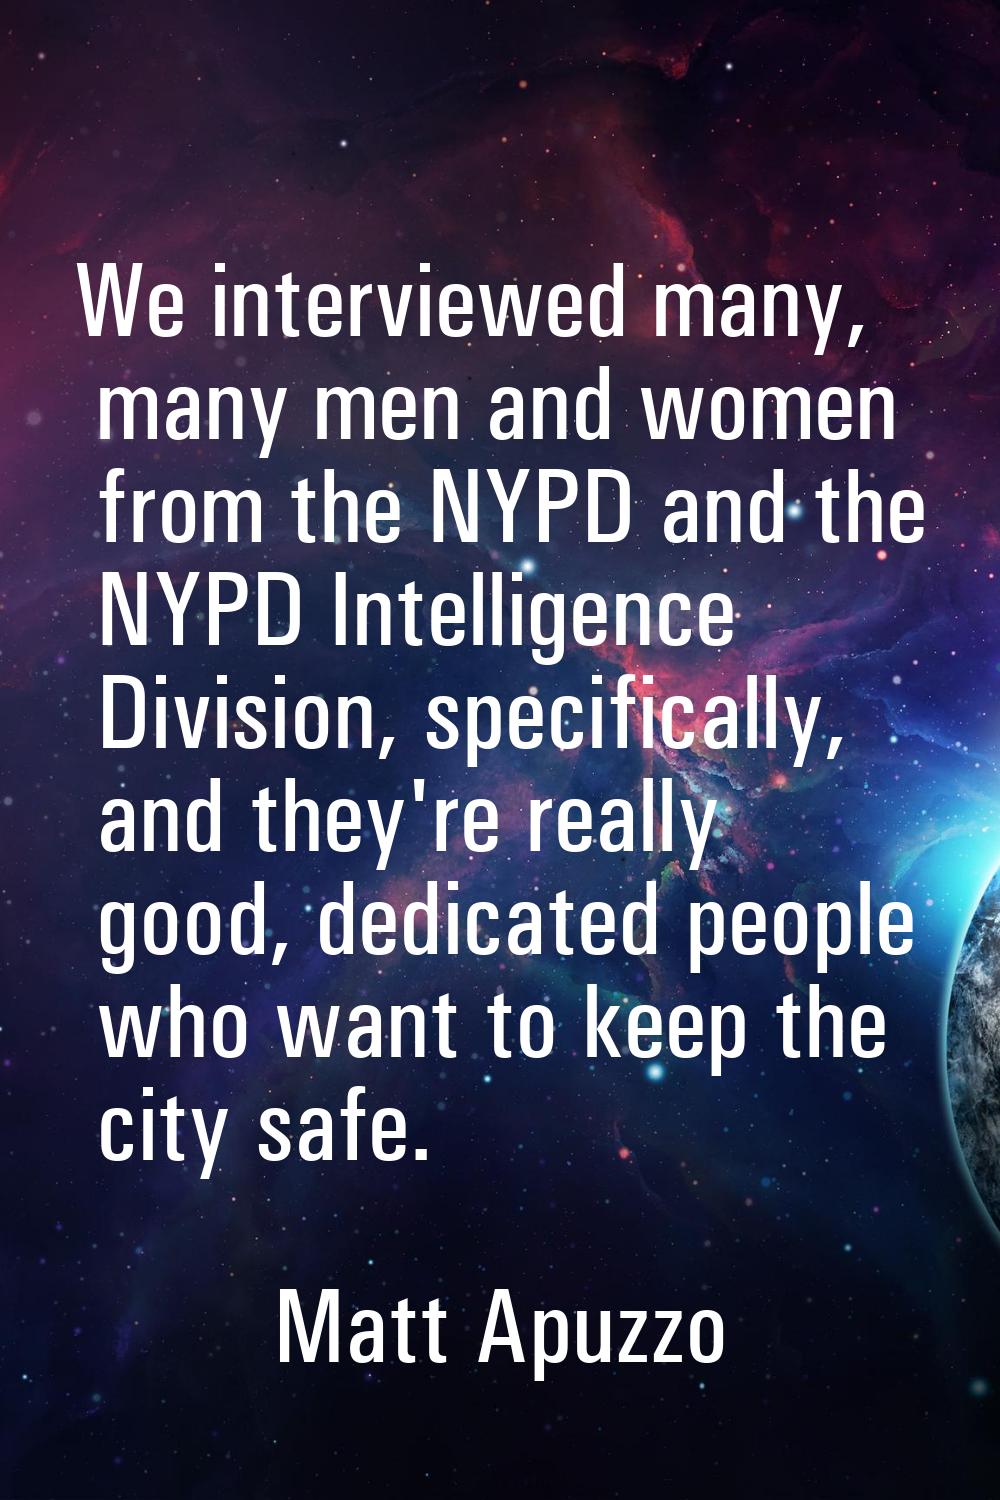 We interviewed many, many men and women from the NYPD and the NYPD Intelligence Division, specifica